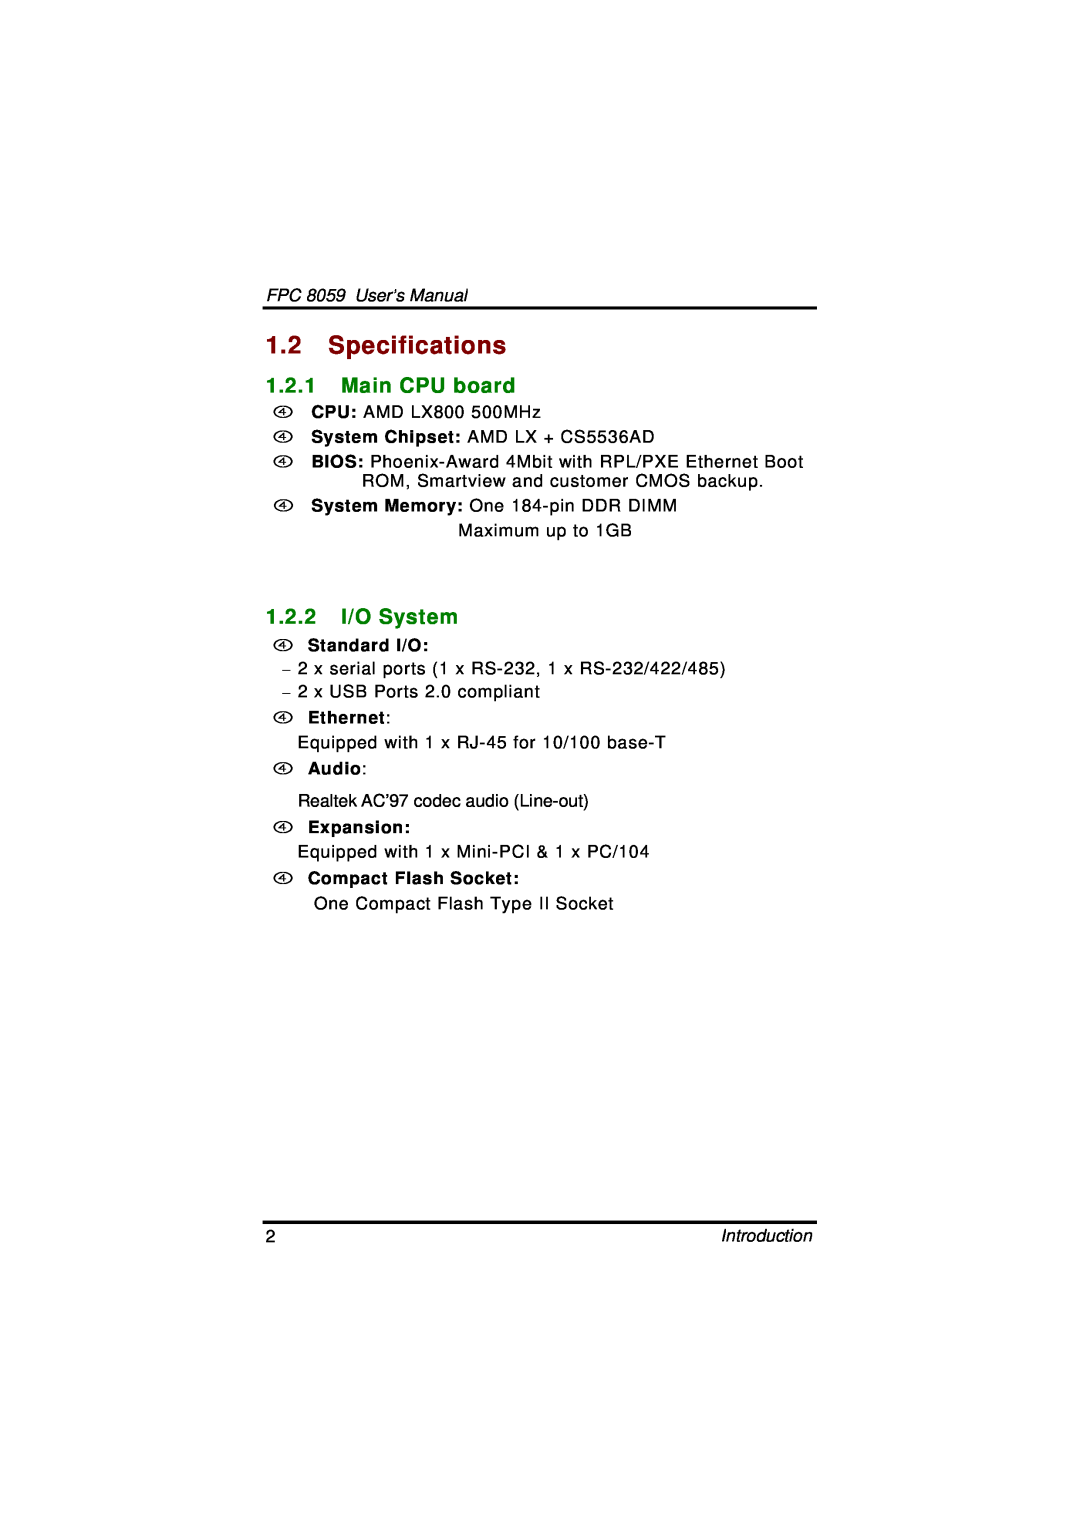 Acnodes user manual Specifications, Main CPU board, 1.2.2 I/O System, FPC 8059 User’s Manual, Introduction 